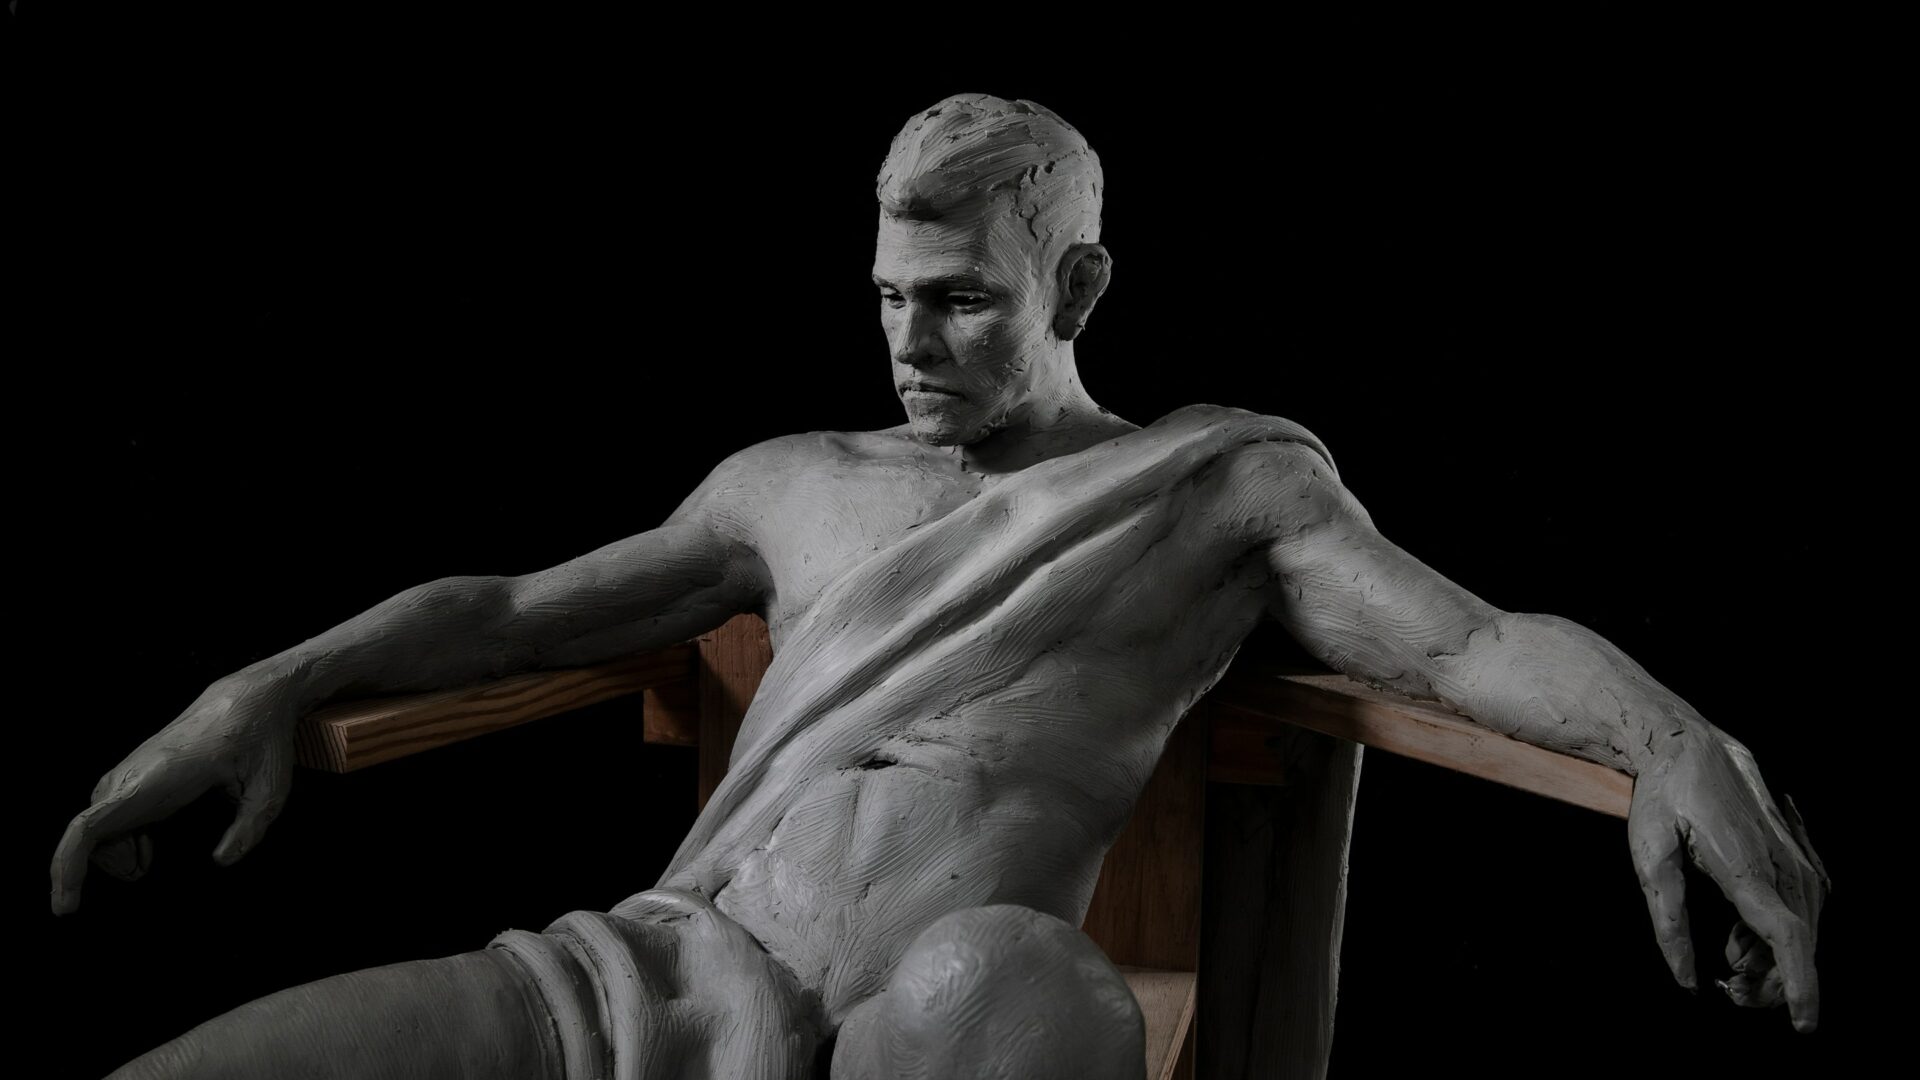 Sculpting MODELING MALE FIGURE using water based clay ( for beginners )  FIGURE MODELING - PART 5 